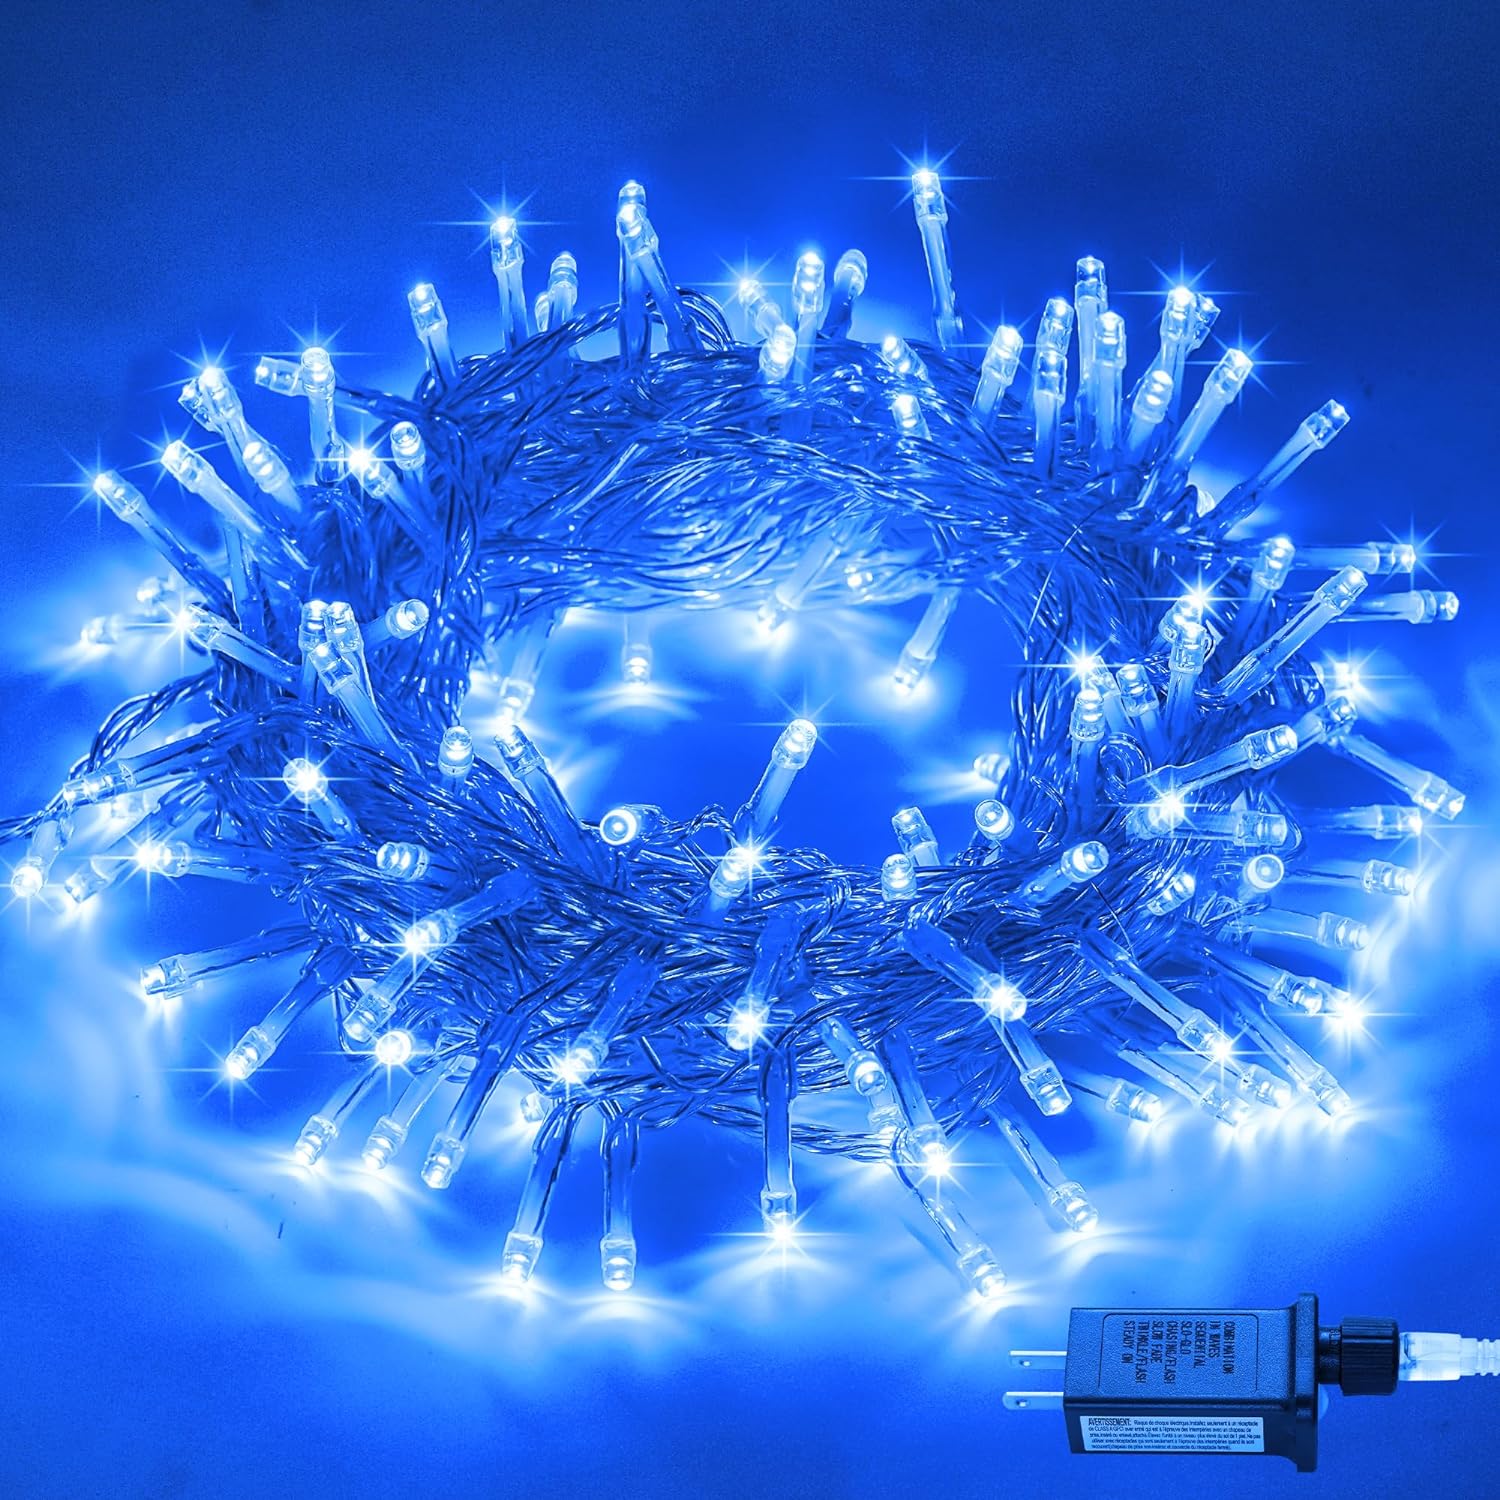 JMEXSUSS 33ft 100 LED Blue Lights for Christmas Tree Decor, 8 Modes Blue Christmas Lights Indoor Outdoor Waterproof Plug in, Clear Wire Blue Fairy String Lights for Tree, Xmas, Party, Garden